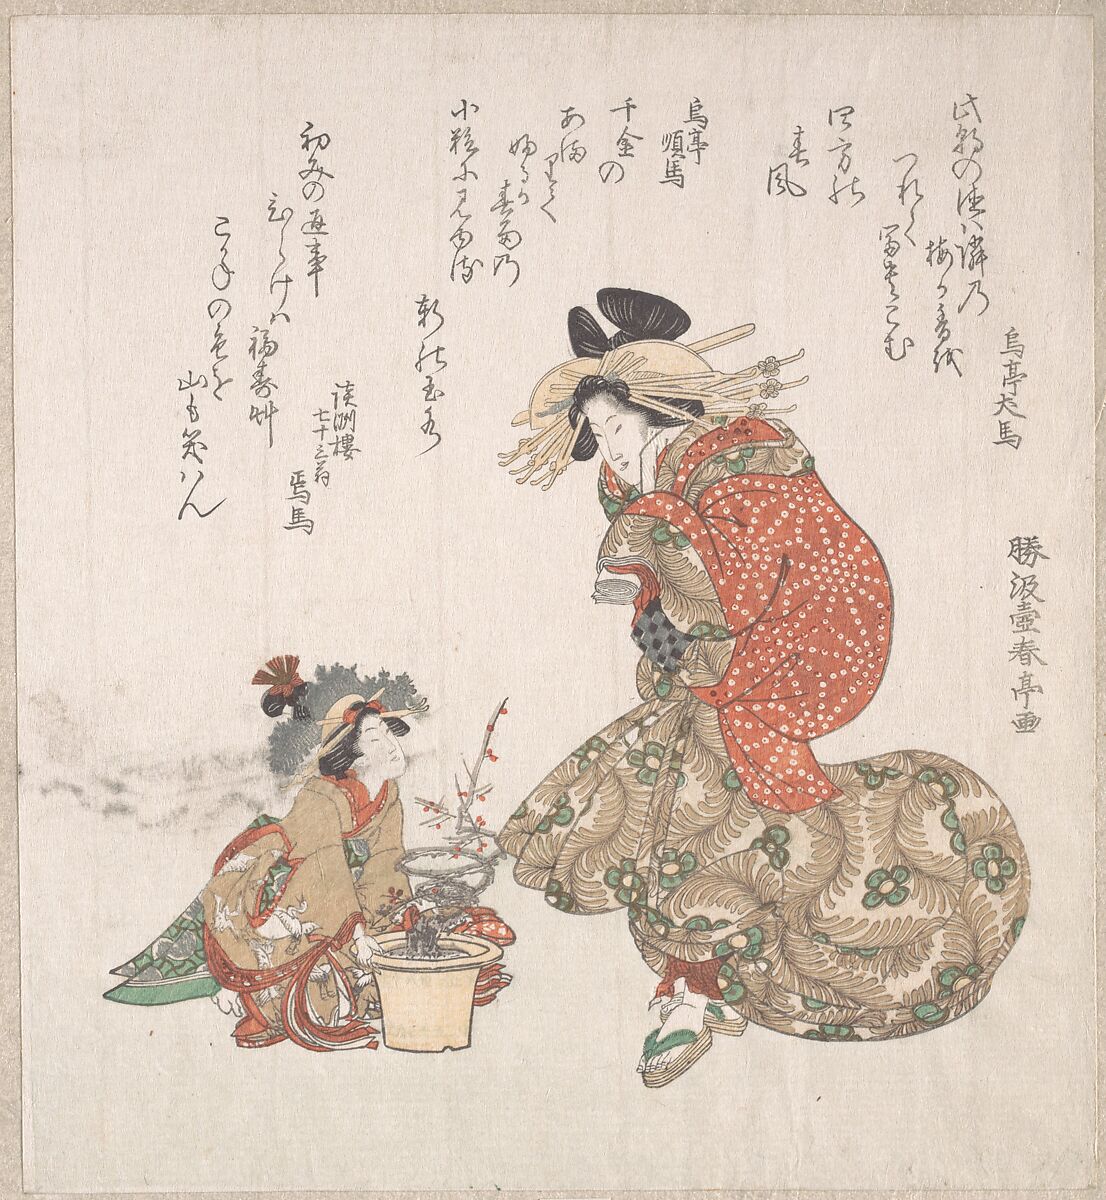 Courtesan and her Child Attendant with a Potted Plum Tree, Katsukawa Shuntei (Japanese, 1770–1820), Part of an album of woodblock prints (surimono); ink and color on paper, Japan 